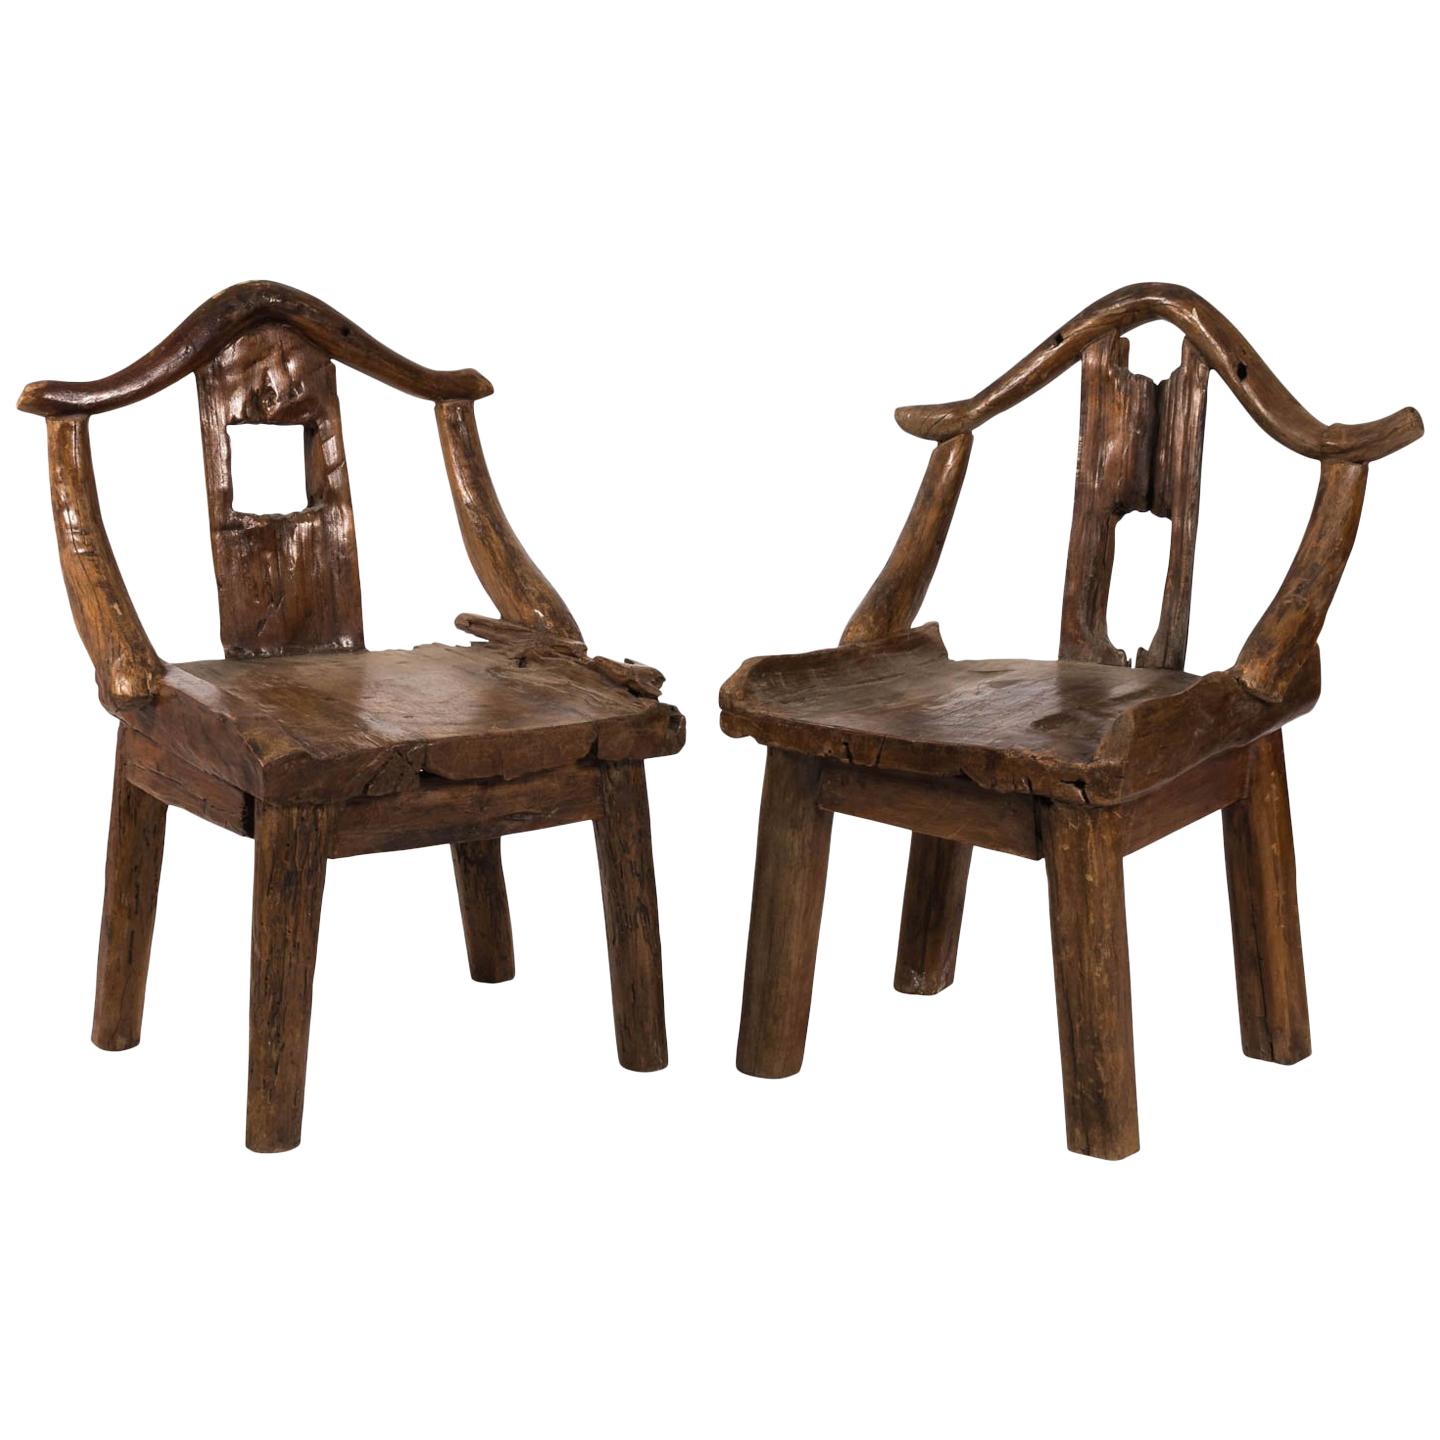 Pair of Late 19th Century Chinese Yoke Back Root Chairs